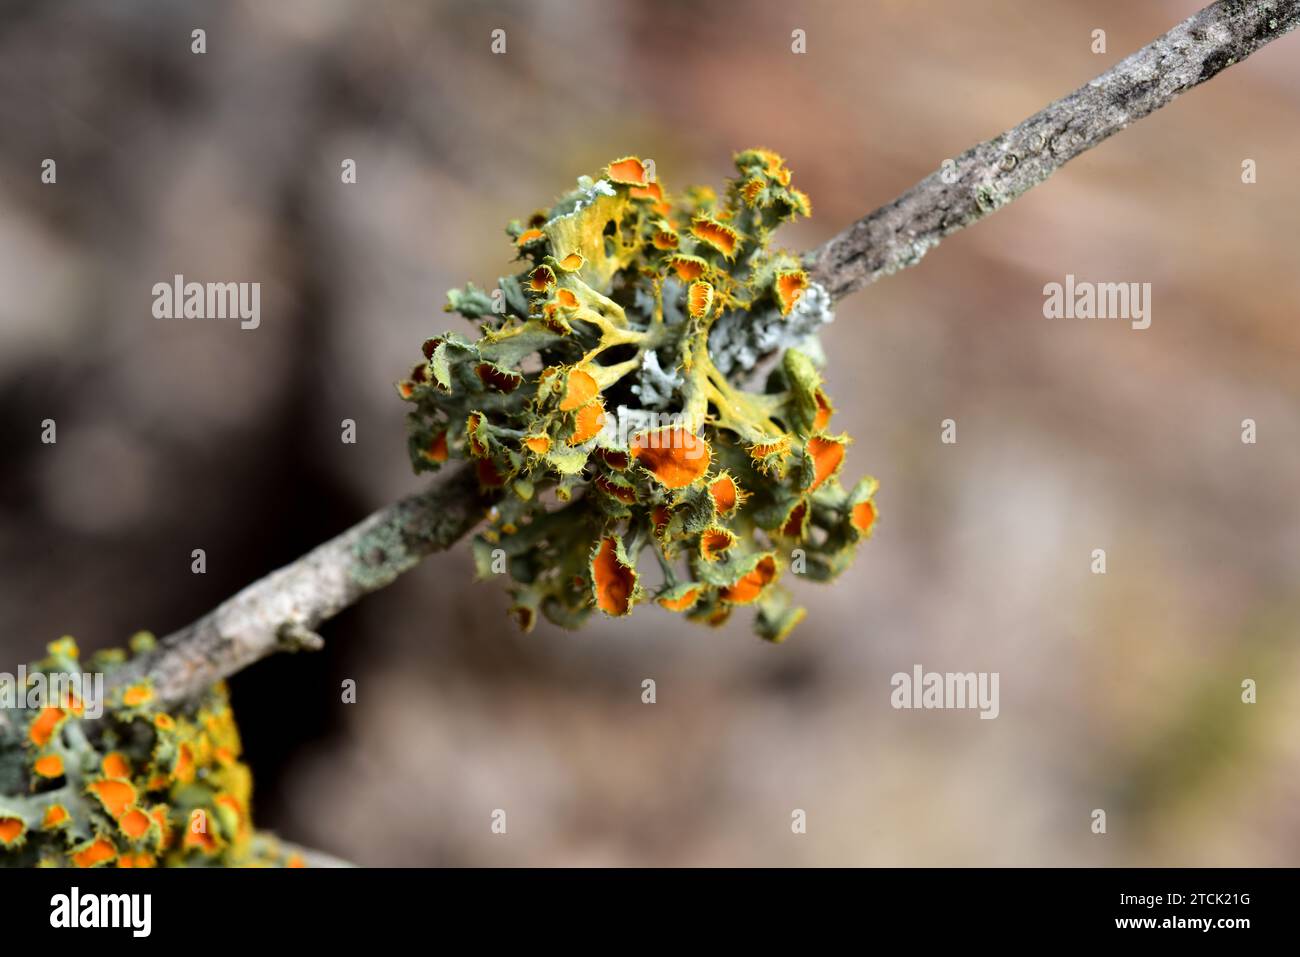 Teloschistes chrysophthalmus is a fruticulose lichen that grows on the tree branches, in this photo on wild olive (Olea europaea sylvestris). This pho Stock Photo